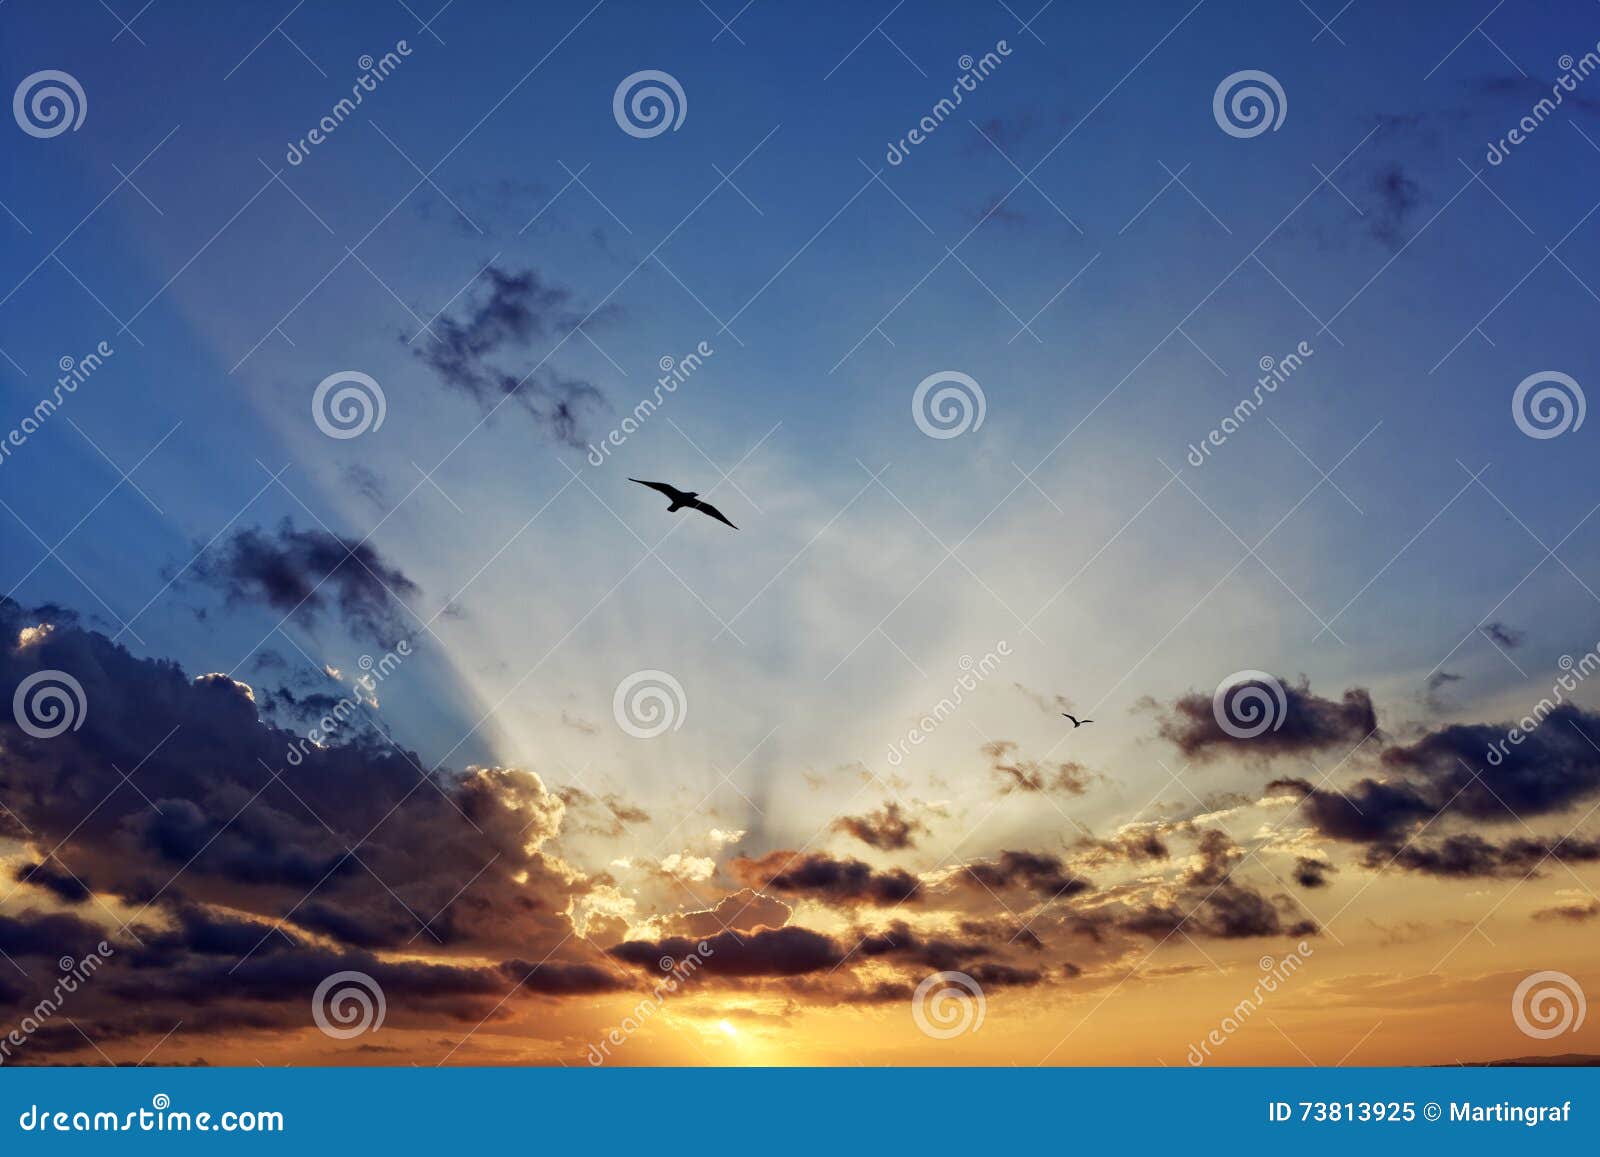 Sun Rays through Clouds with Seagull Flying in Romantic Sunset Sky ...